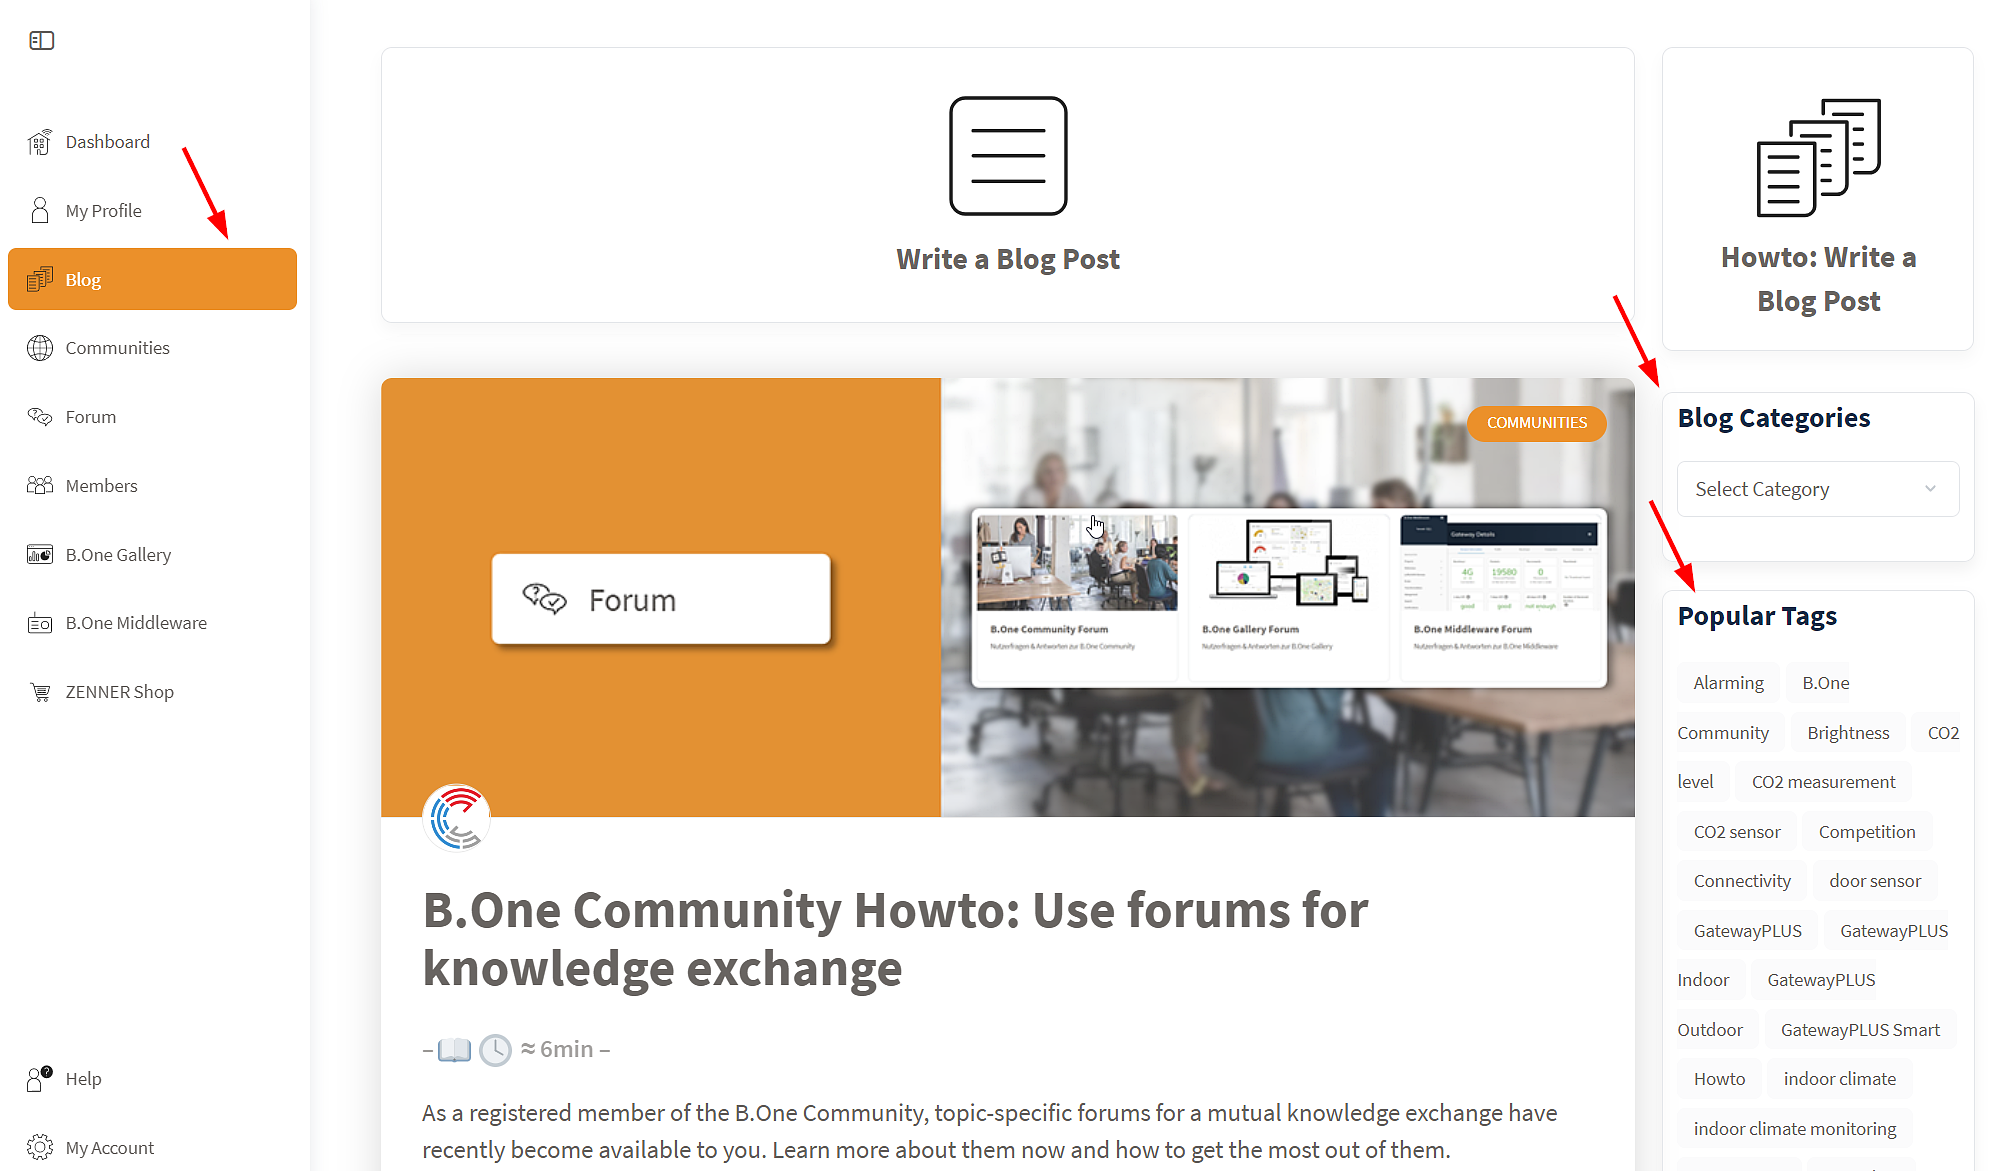 B.One Community: Blog with categories and tag cloud